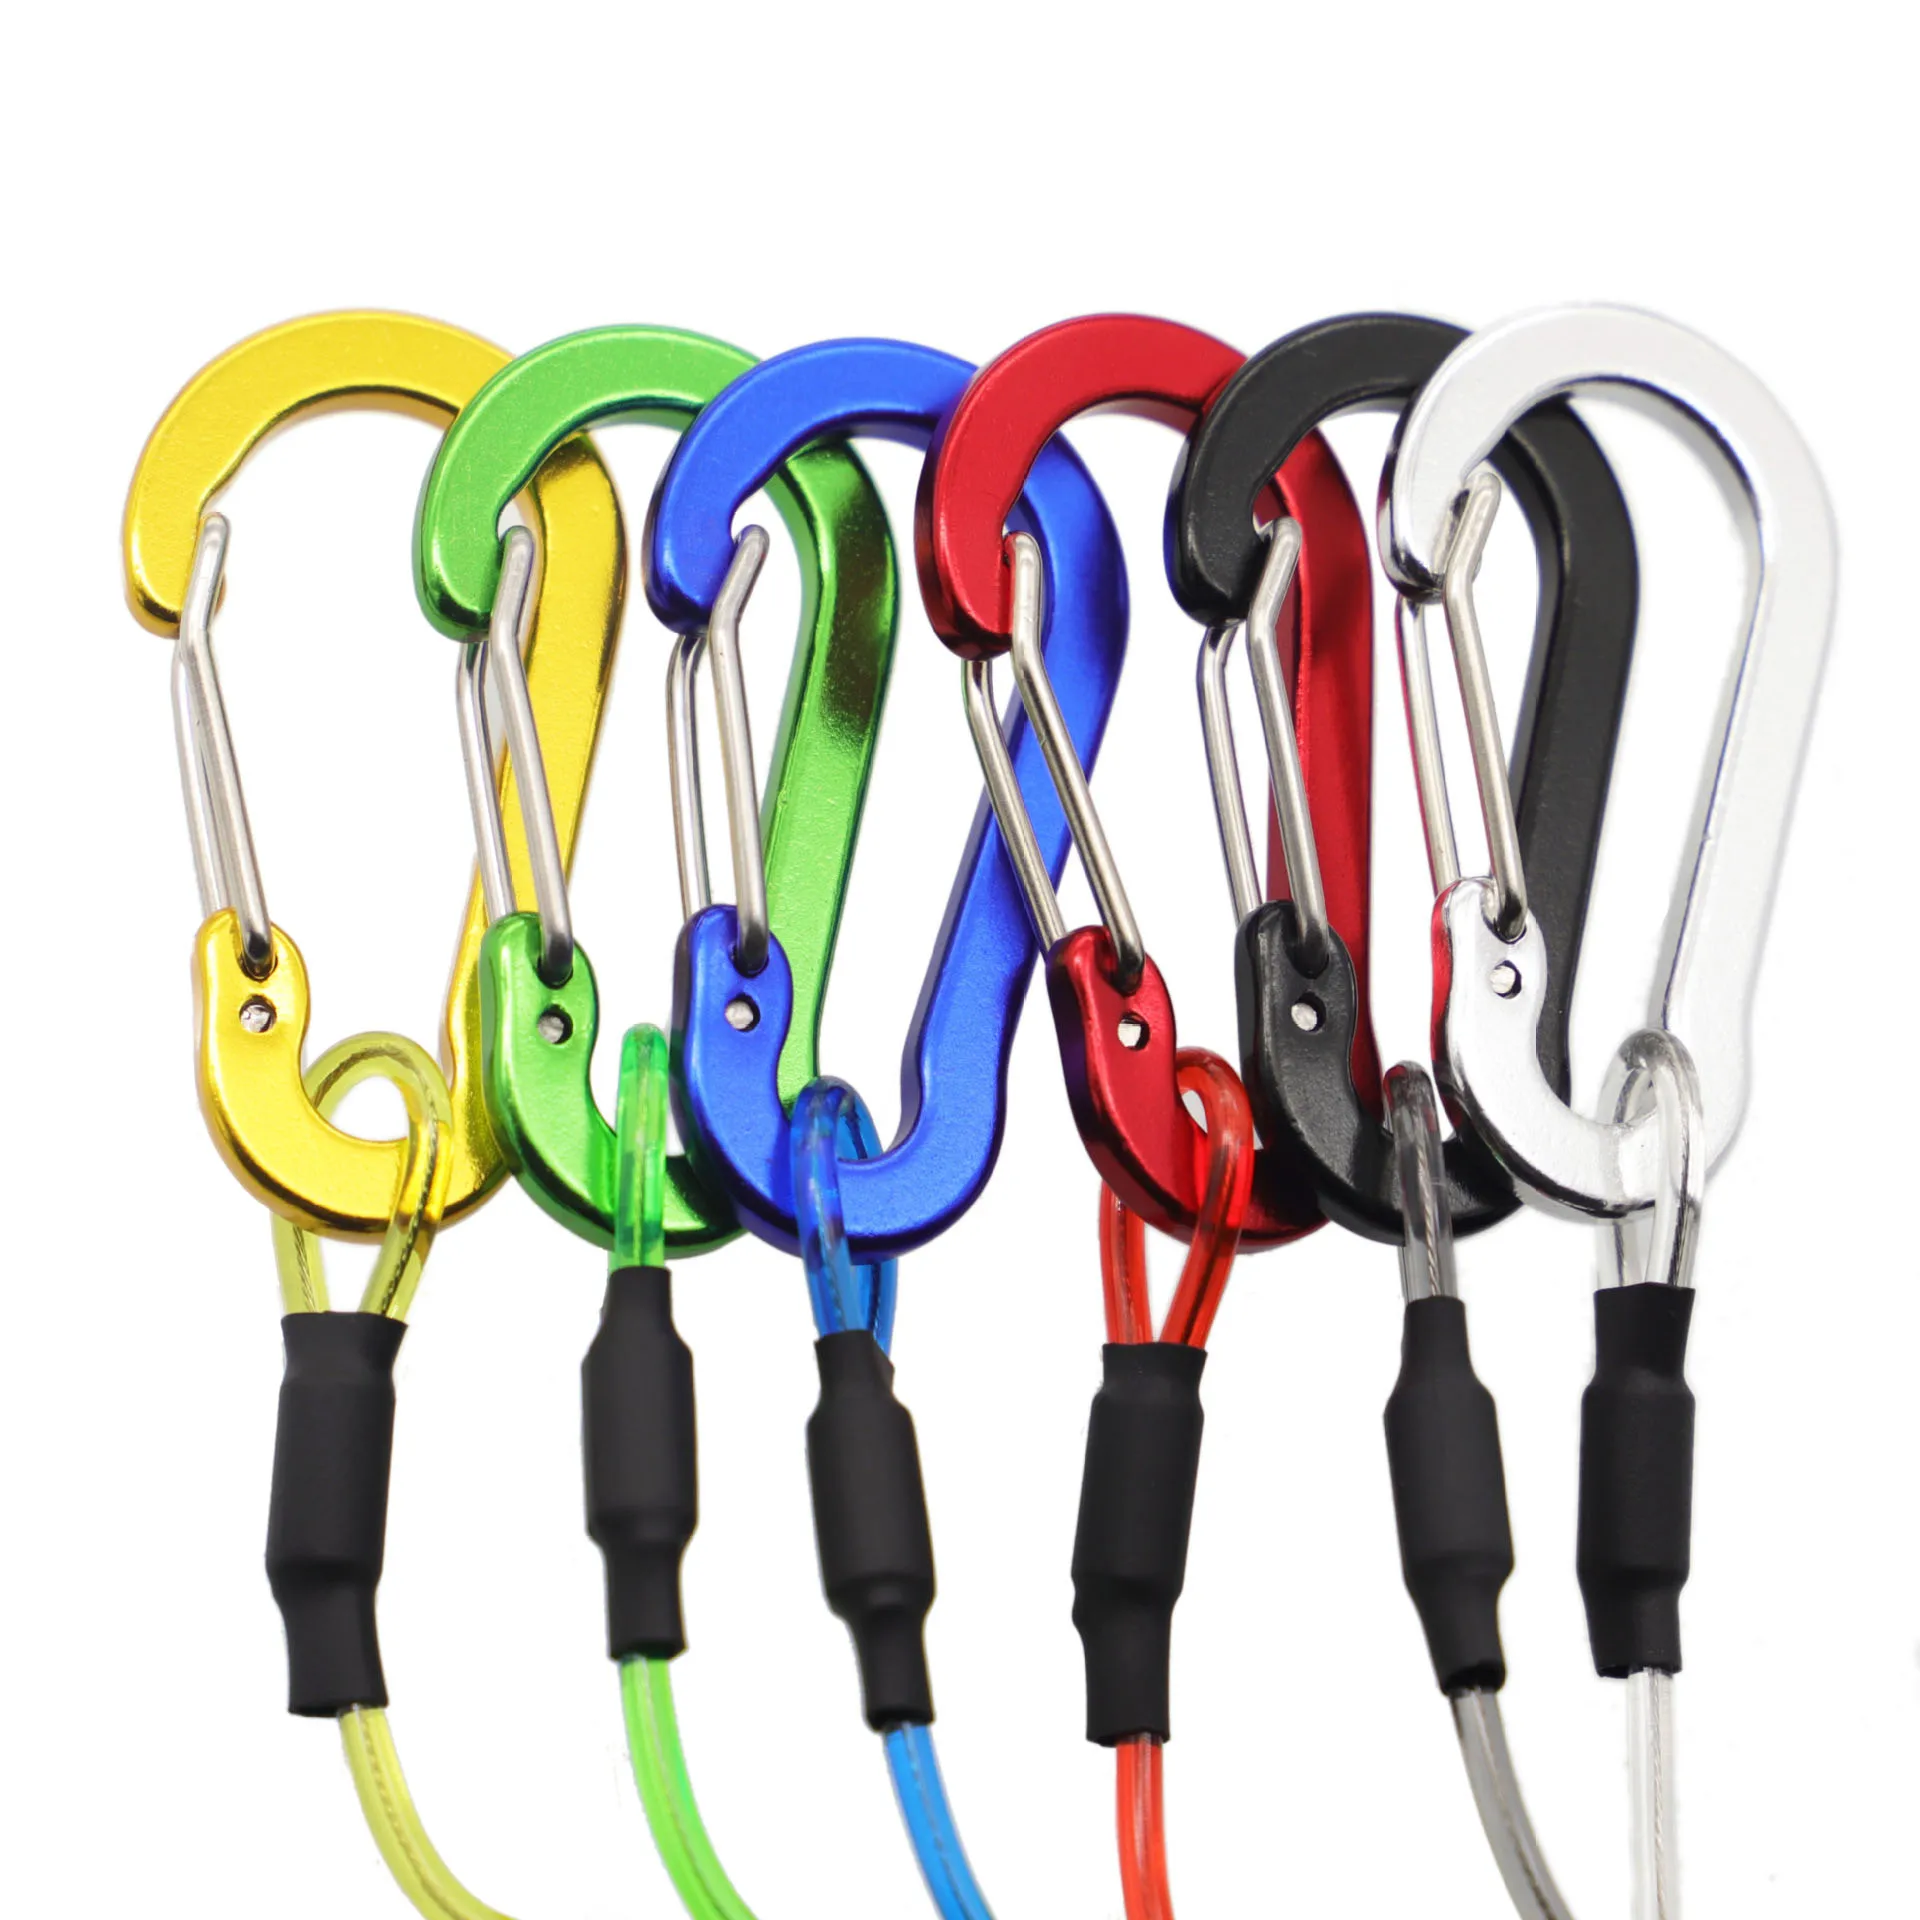 Retractable Tool Leash Fishing Rod Safety